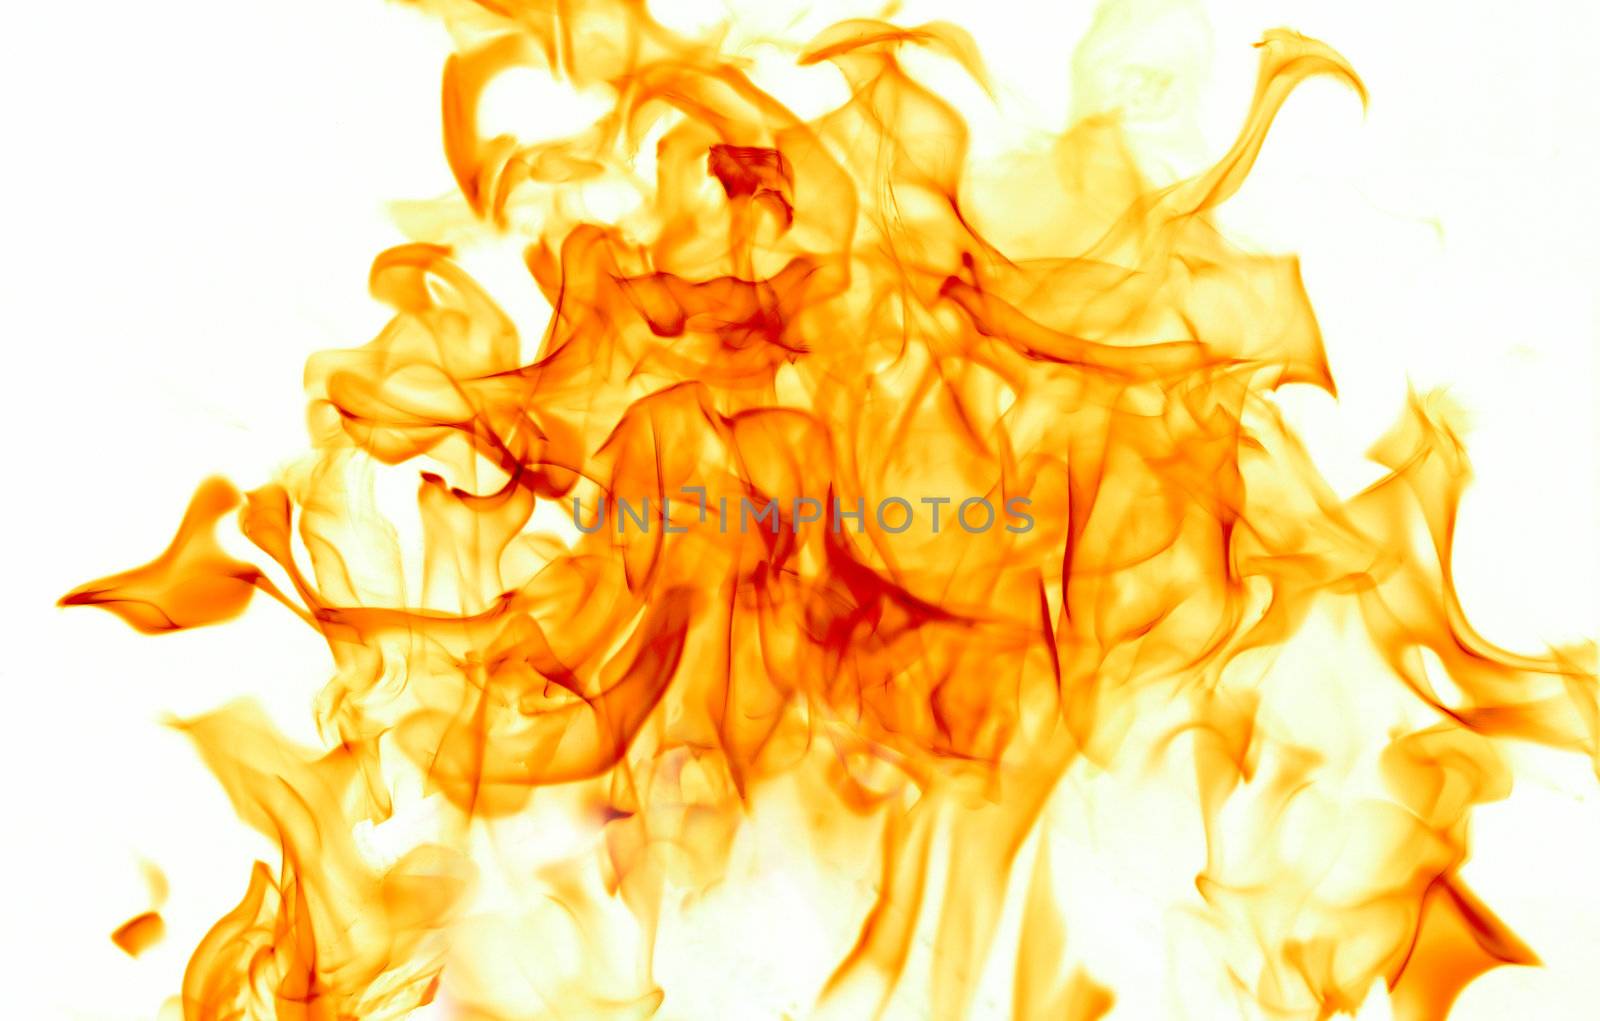 Dancing flames against a white background.
